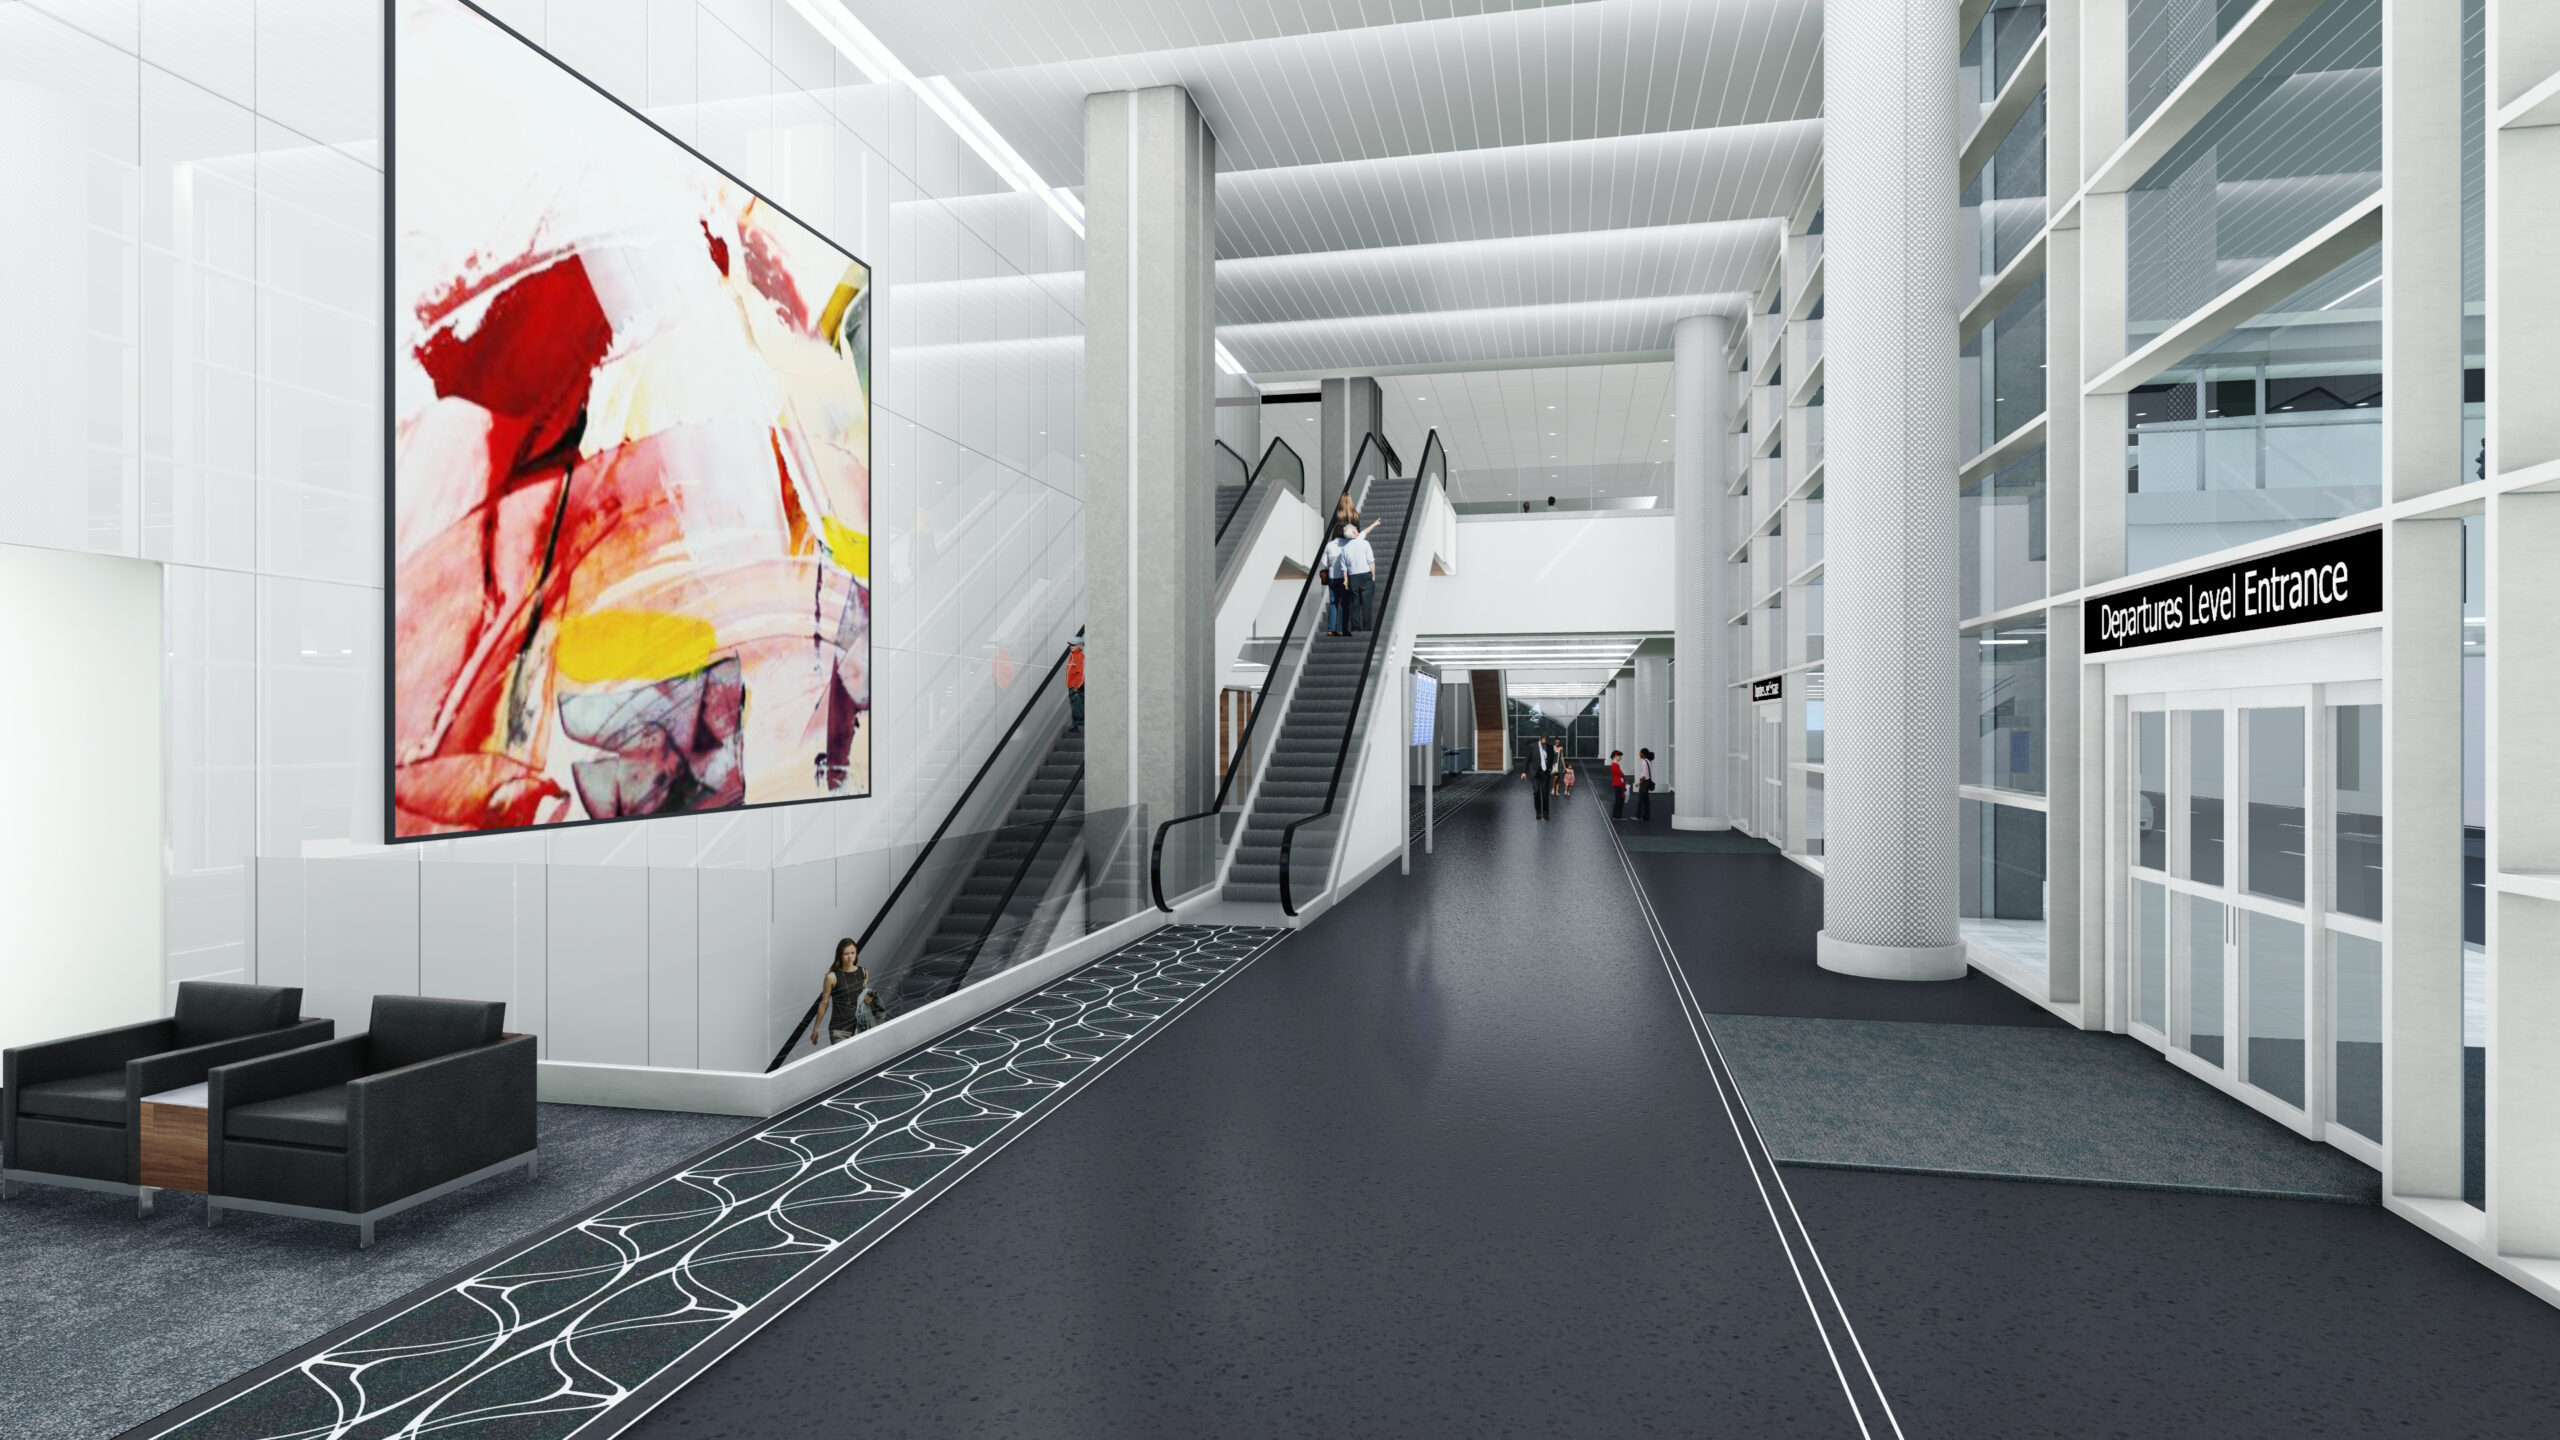 A rendering of the interior of the Departures level of the Red Express Curbsides